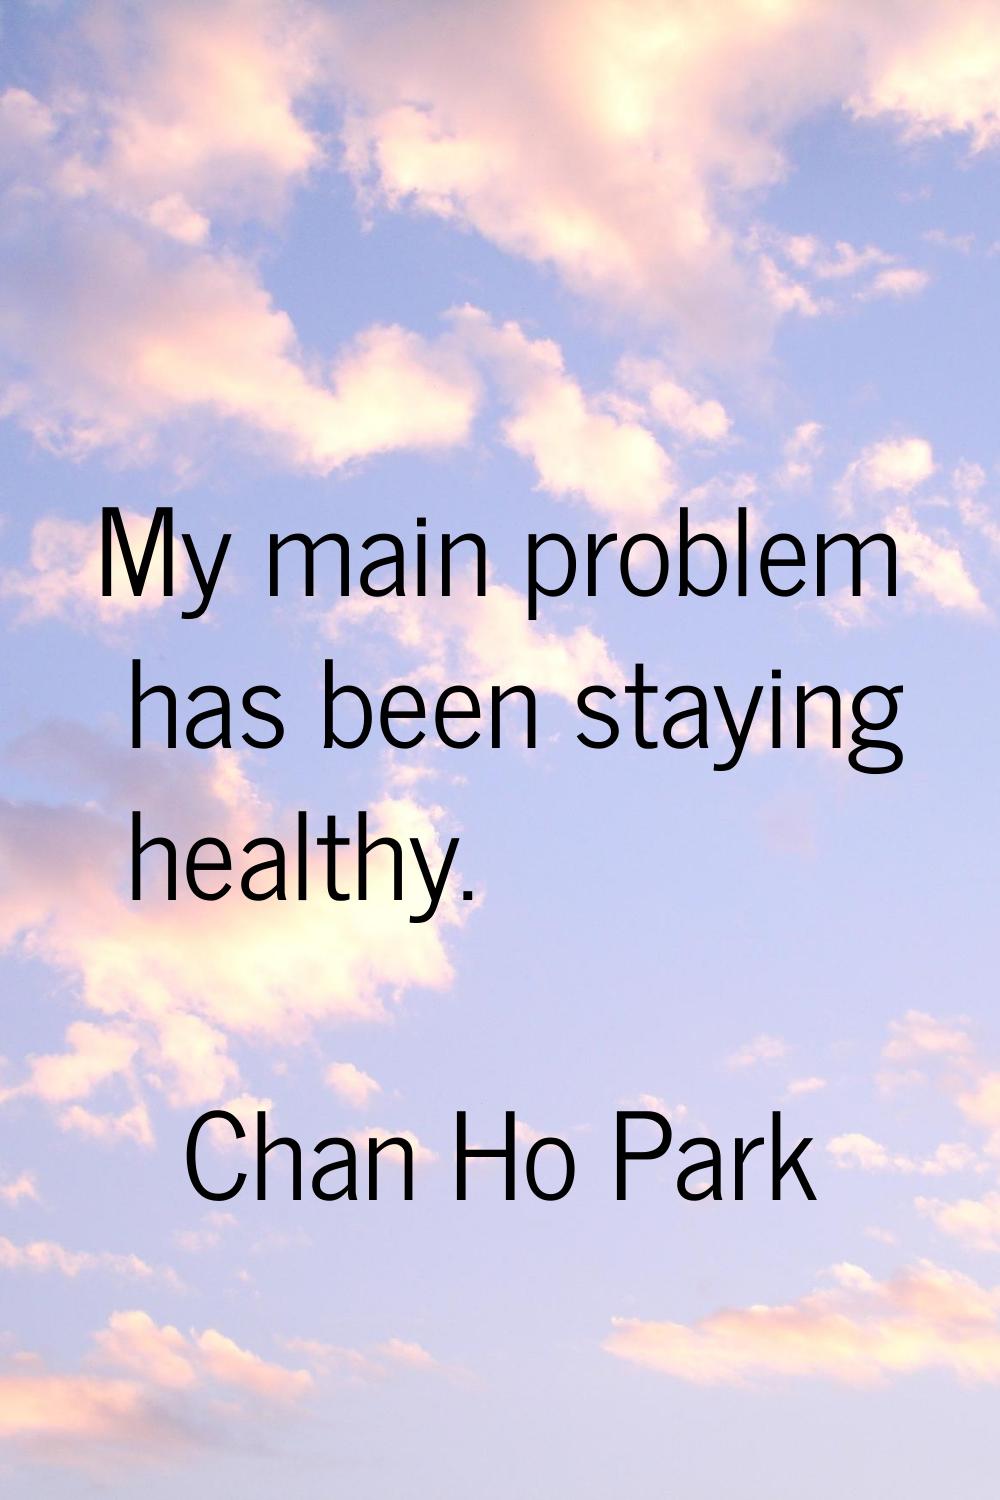 My main problem has been staying healthy.